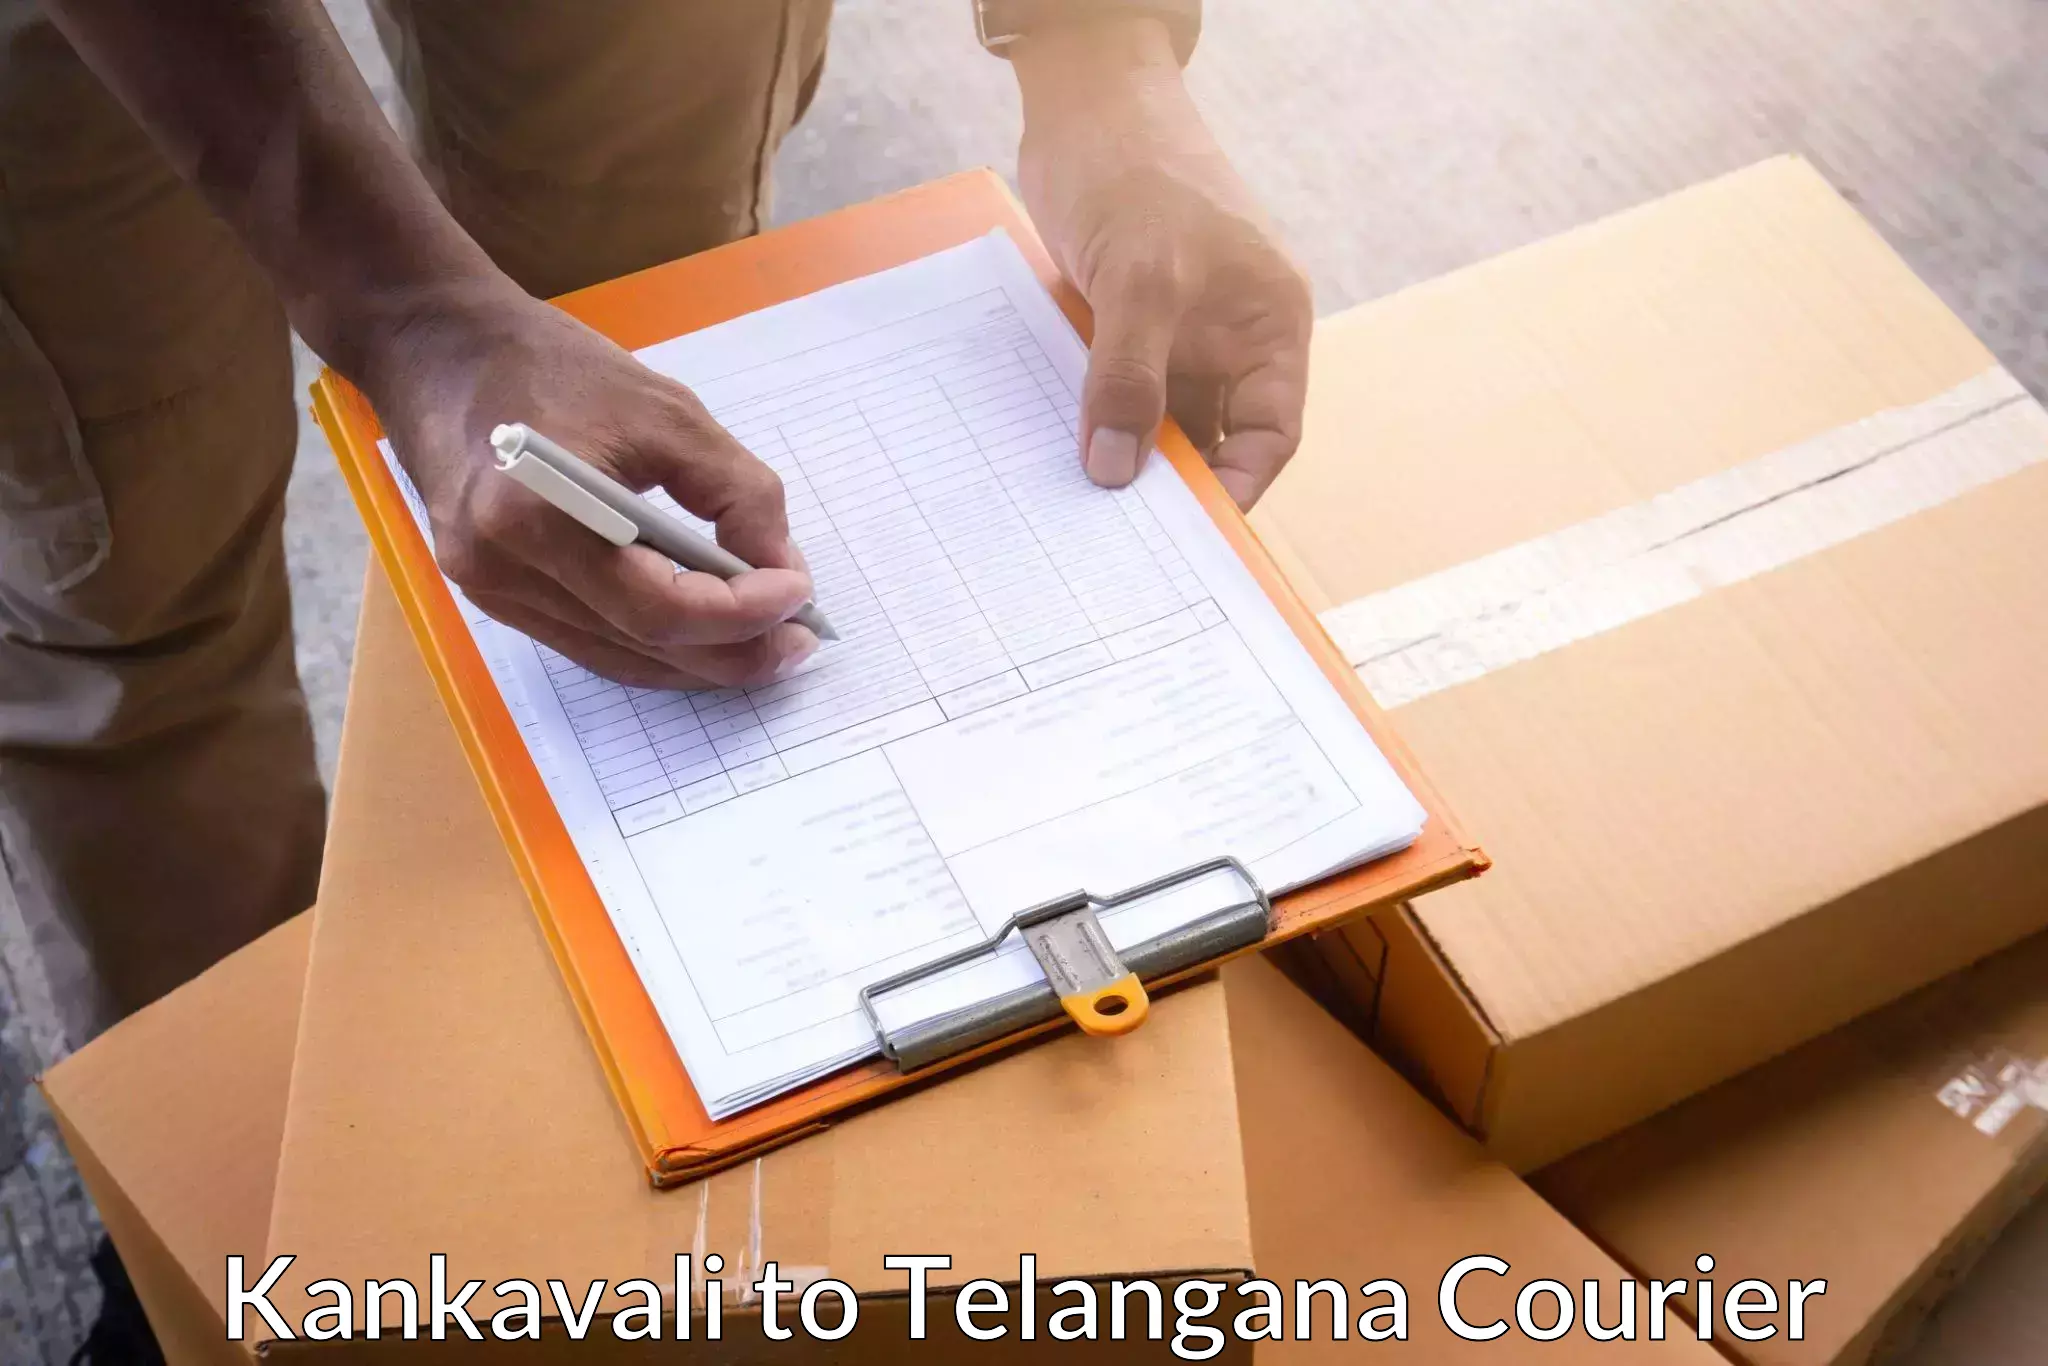 Parcel service for businesses Kankavali to Telangana